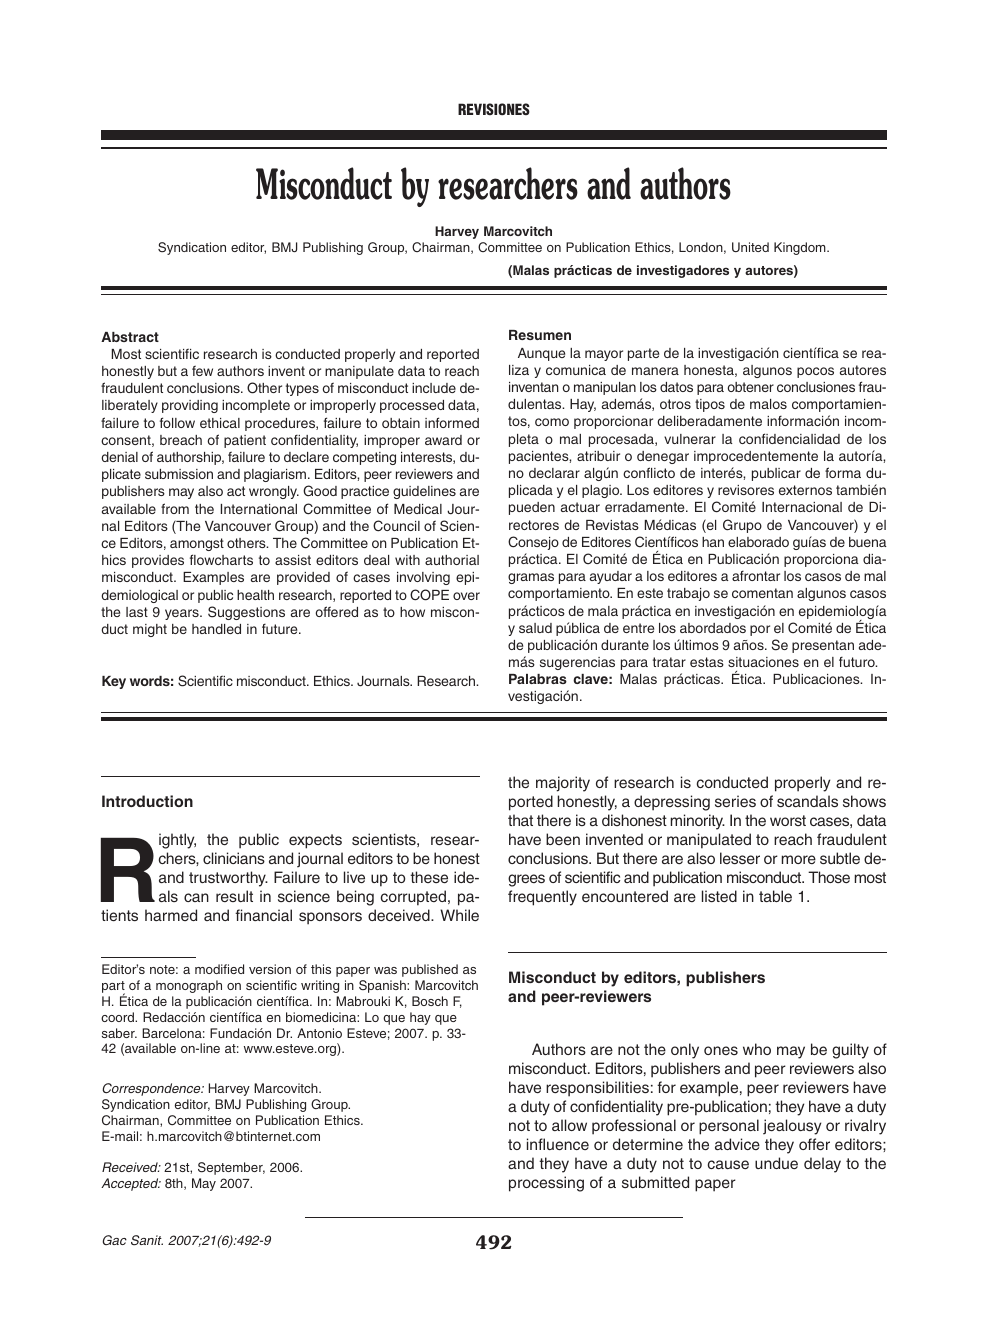 Misconduct By Researchers And Authors Topic Of Research Paper In Clinical Medicine Download Scholarly Article Pdf And Read For Free On Cyberleninka Open Science Hub